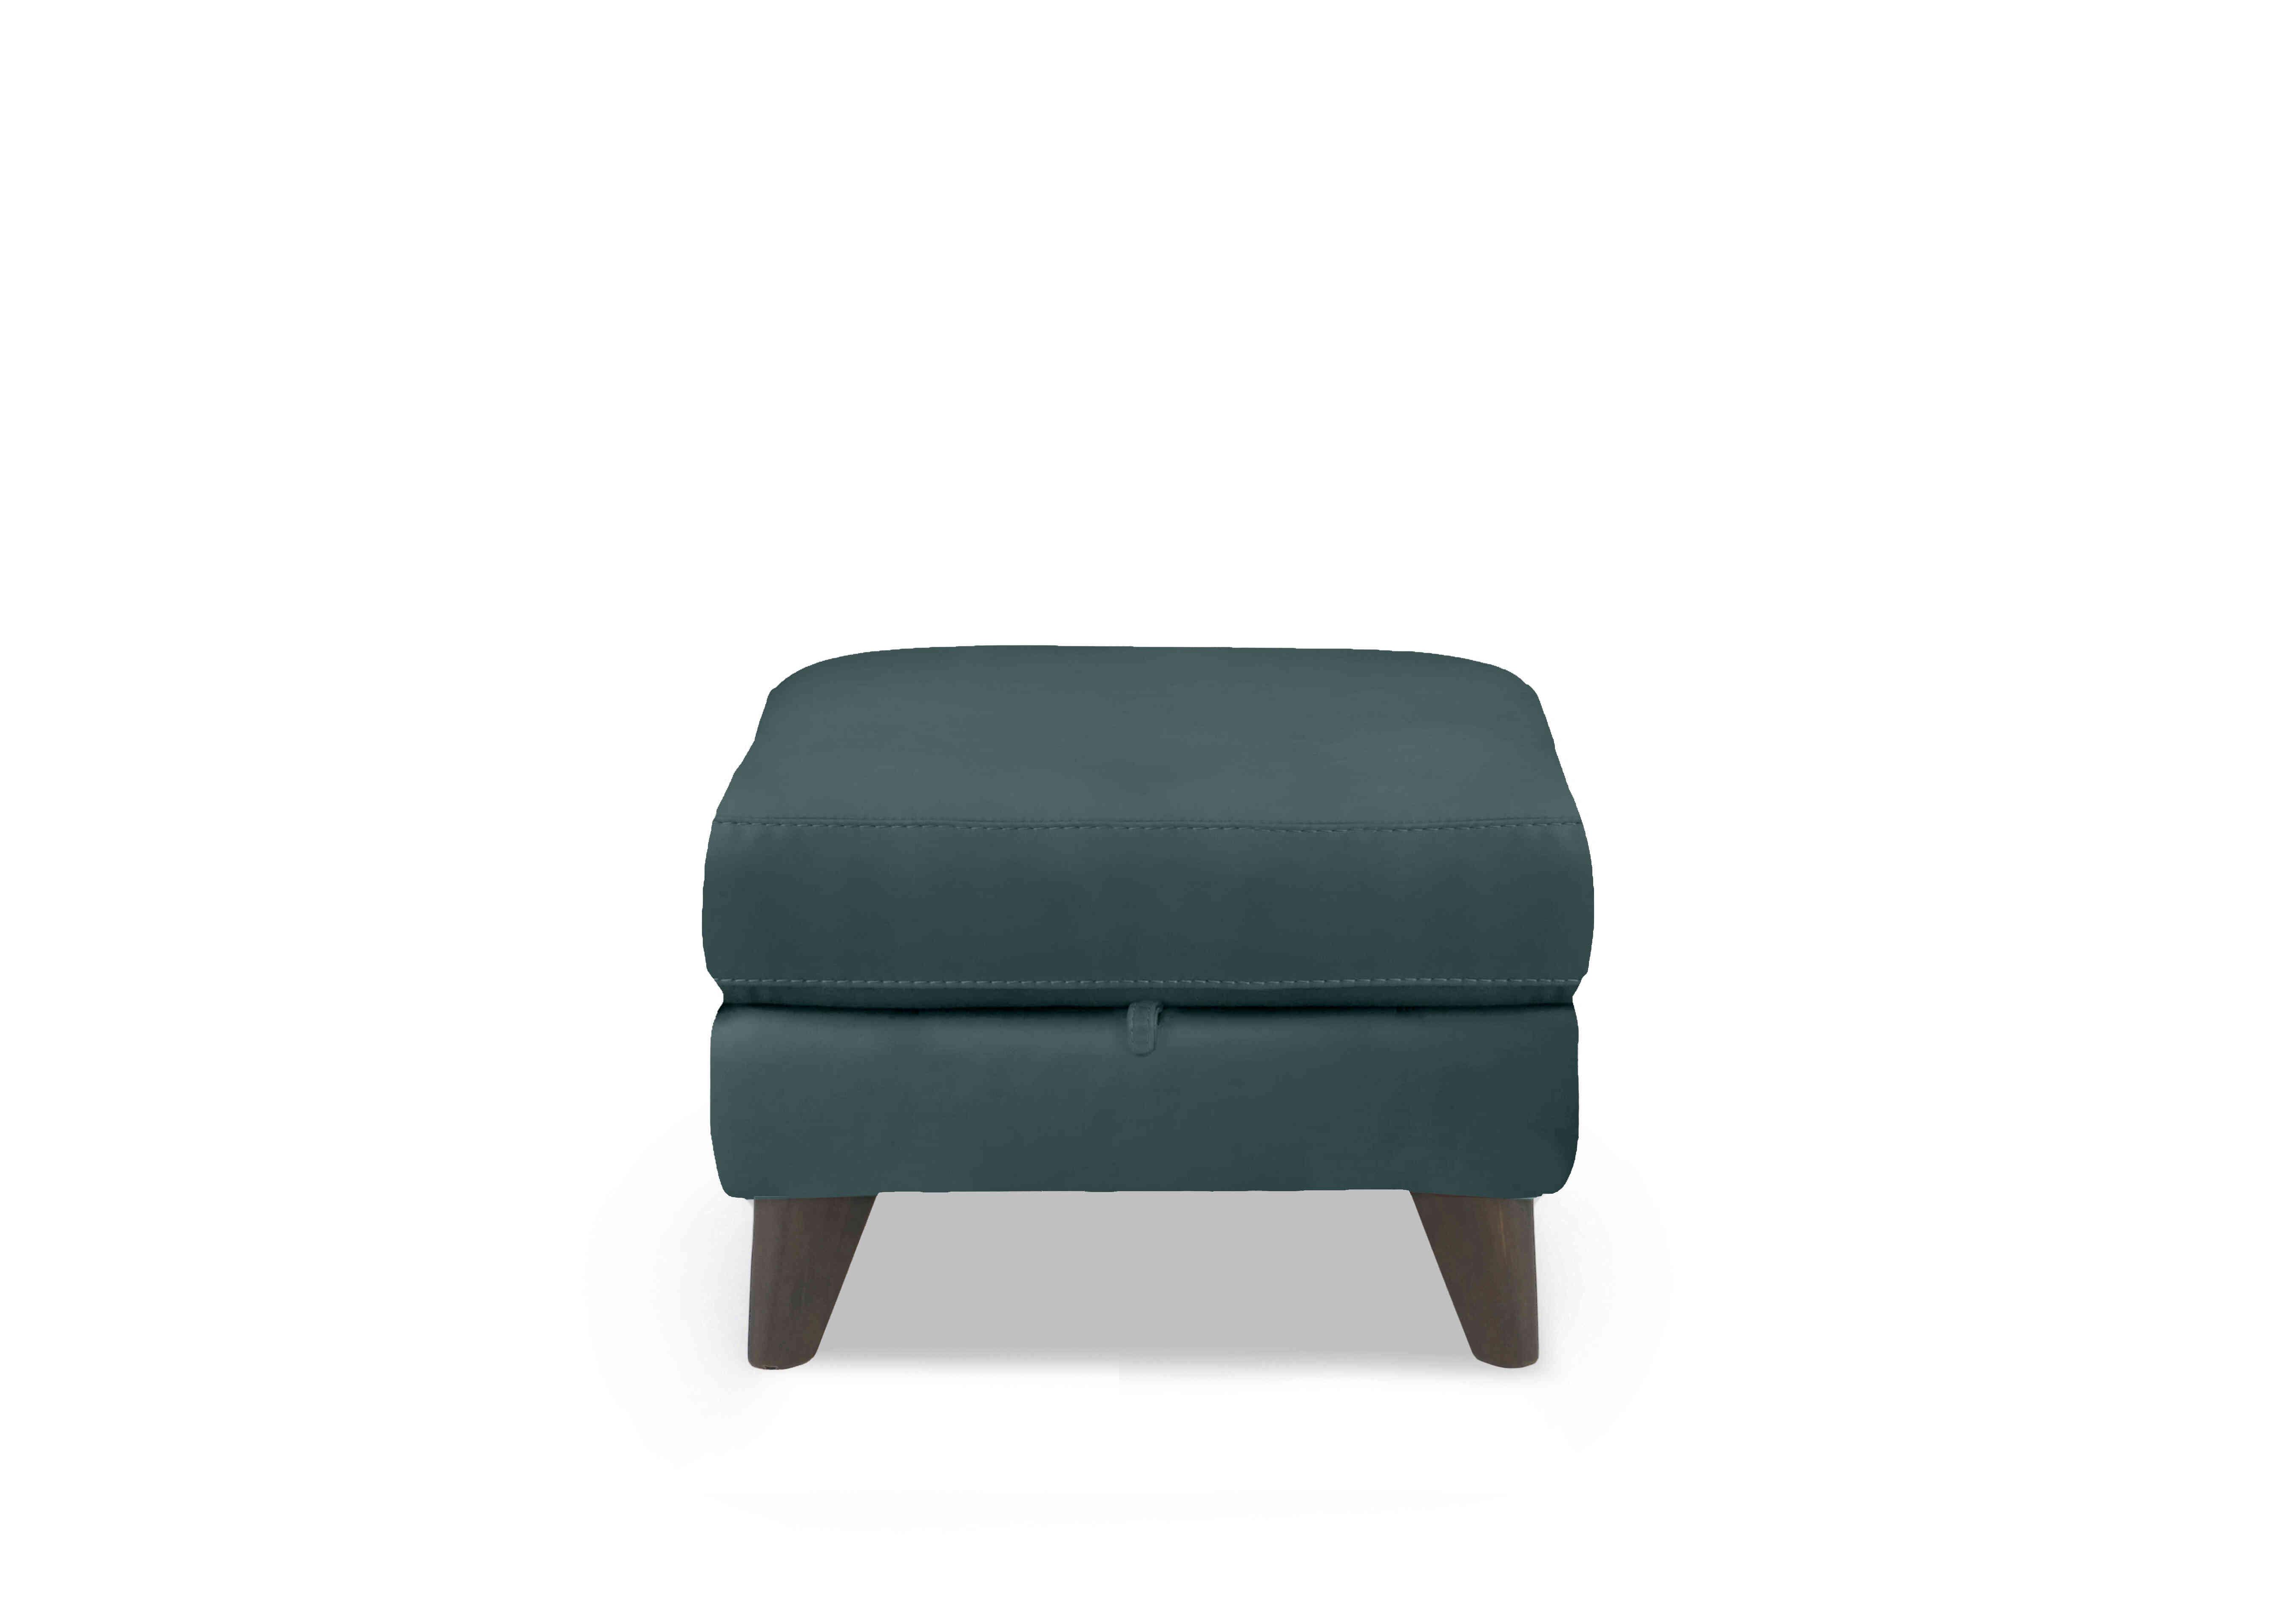 Wade Leather Storage Footstool in Bv-301e Lake Green on Furniture Village